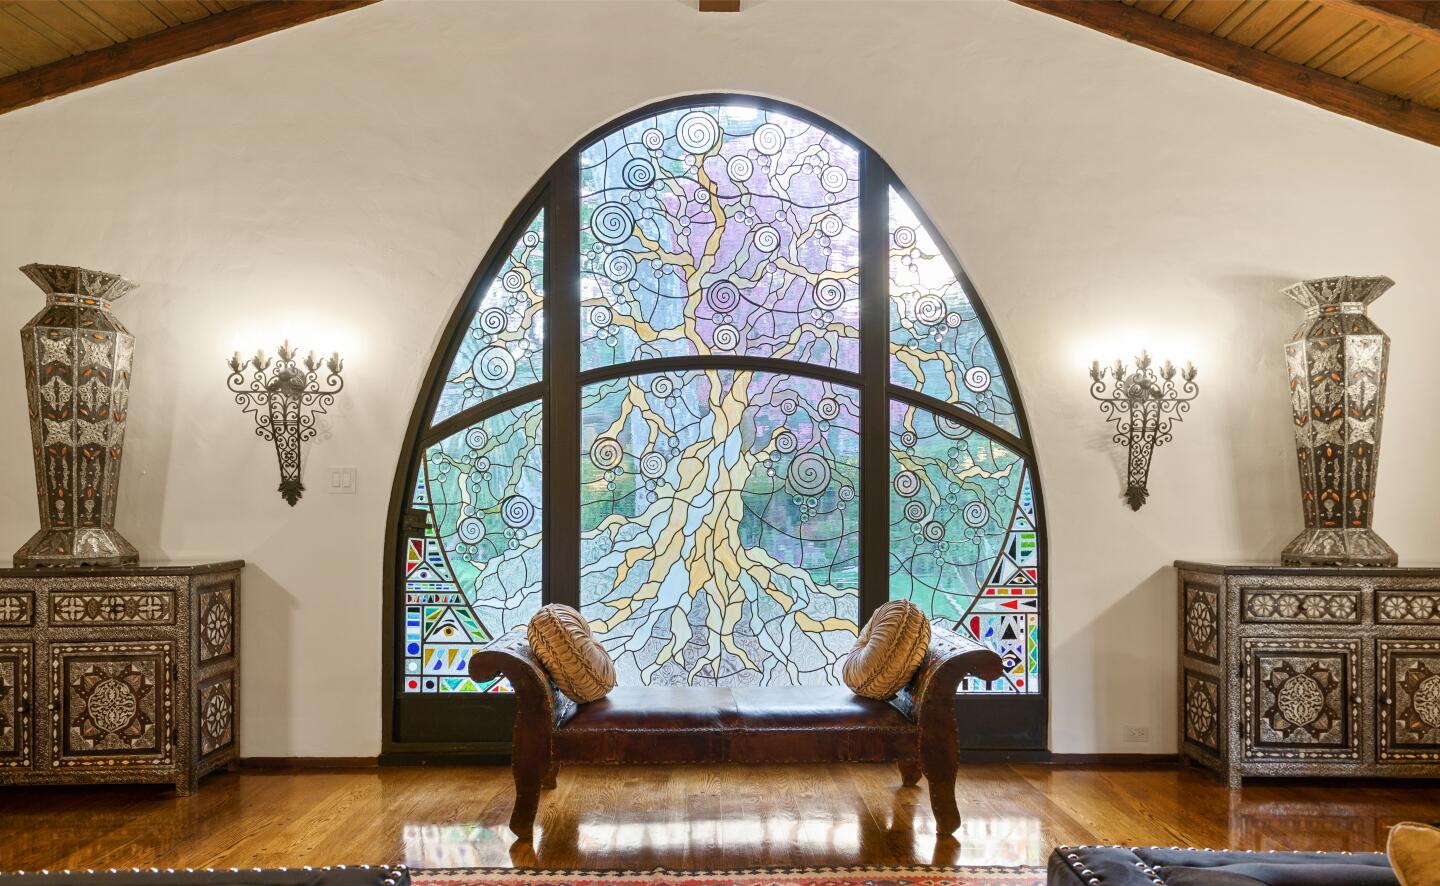 Built in 1928, the Spanish-style hacienda includes a massive custom stained-glass window called "Tree of Life."